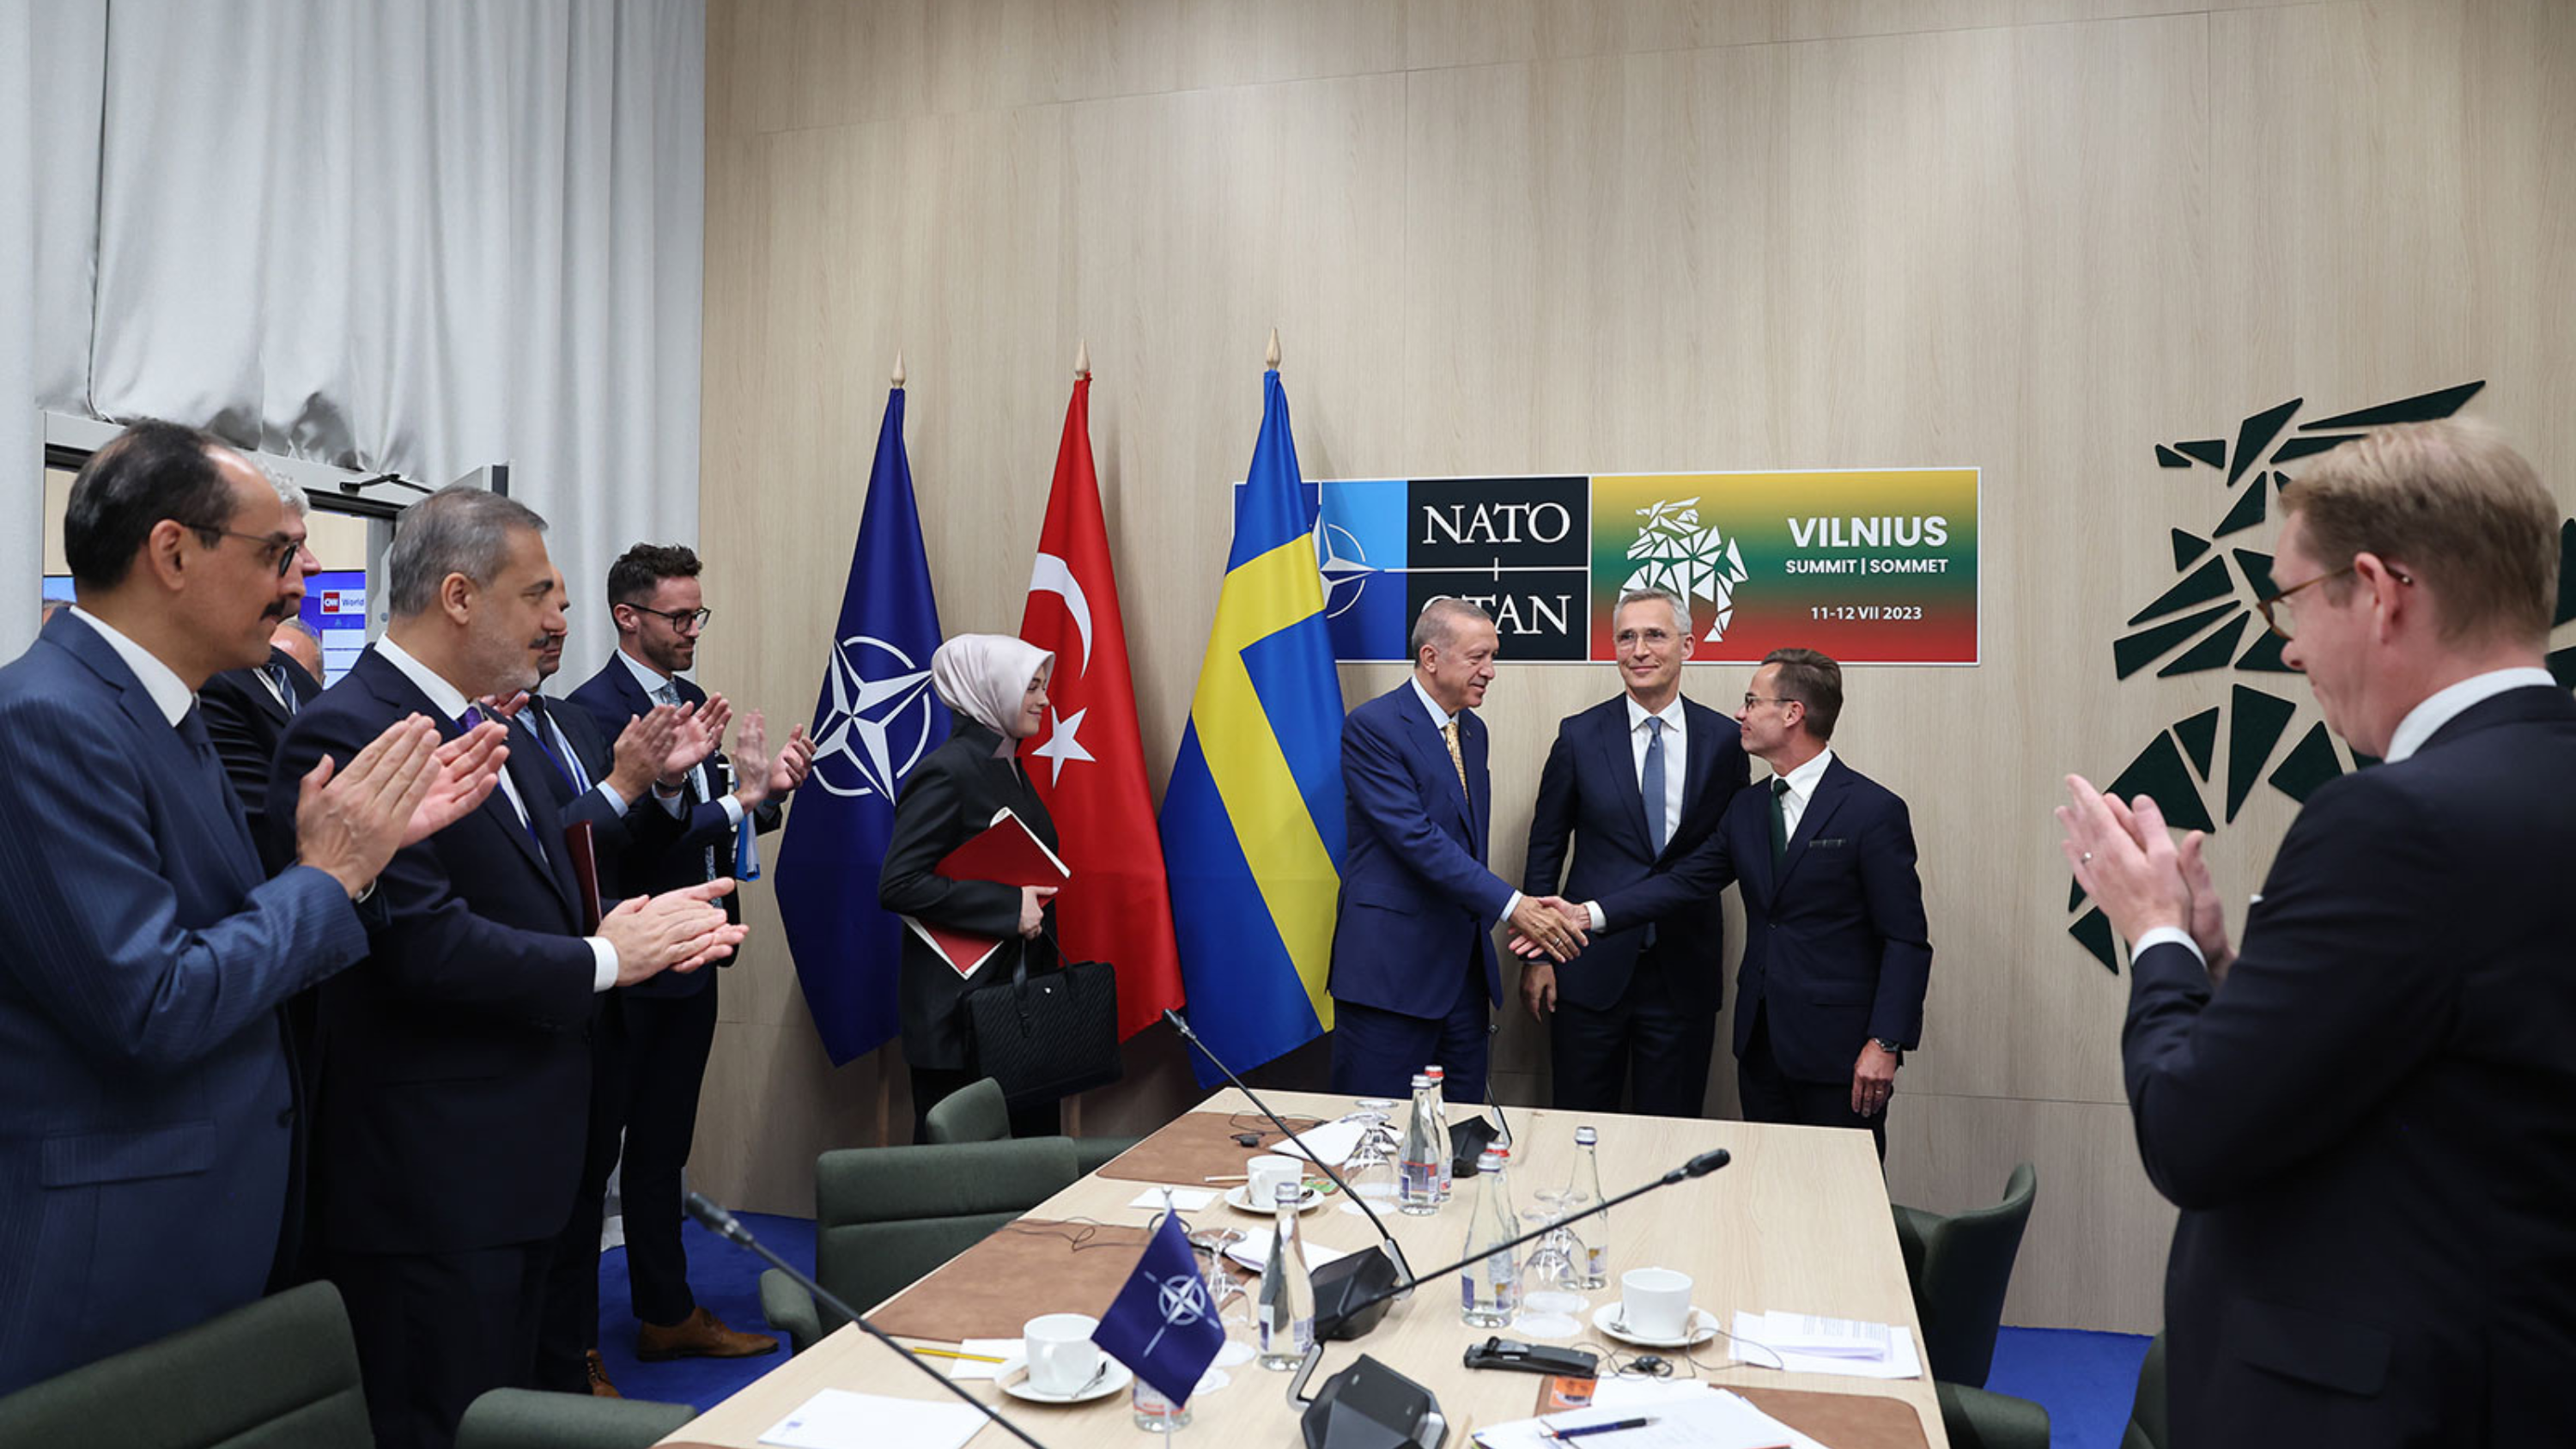 President Recep Tayyip Erdogan with NATO Secretary General Jens Stoltenberg and Swedish Prime Minister Ulf Kristersson during the summit in Vilnius, Lithuania on July 10, 2023. (Photo by TUR Presidency/ Murat Cetinmuhurdar/Anadolu Agency via Getty Images)